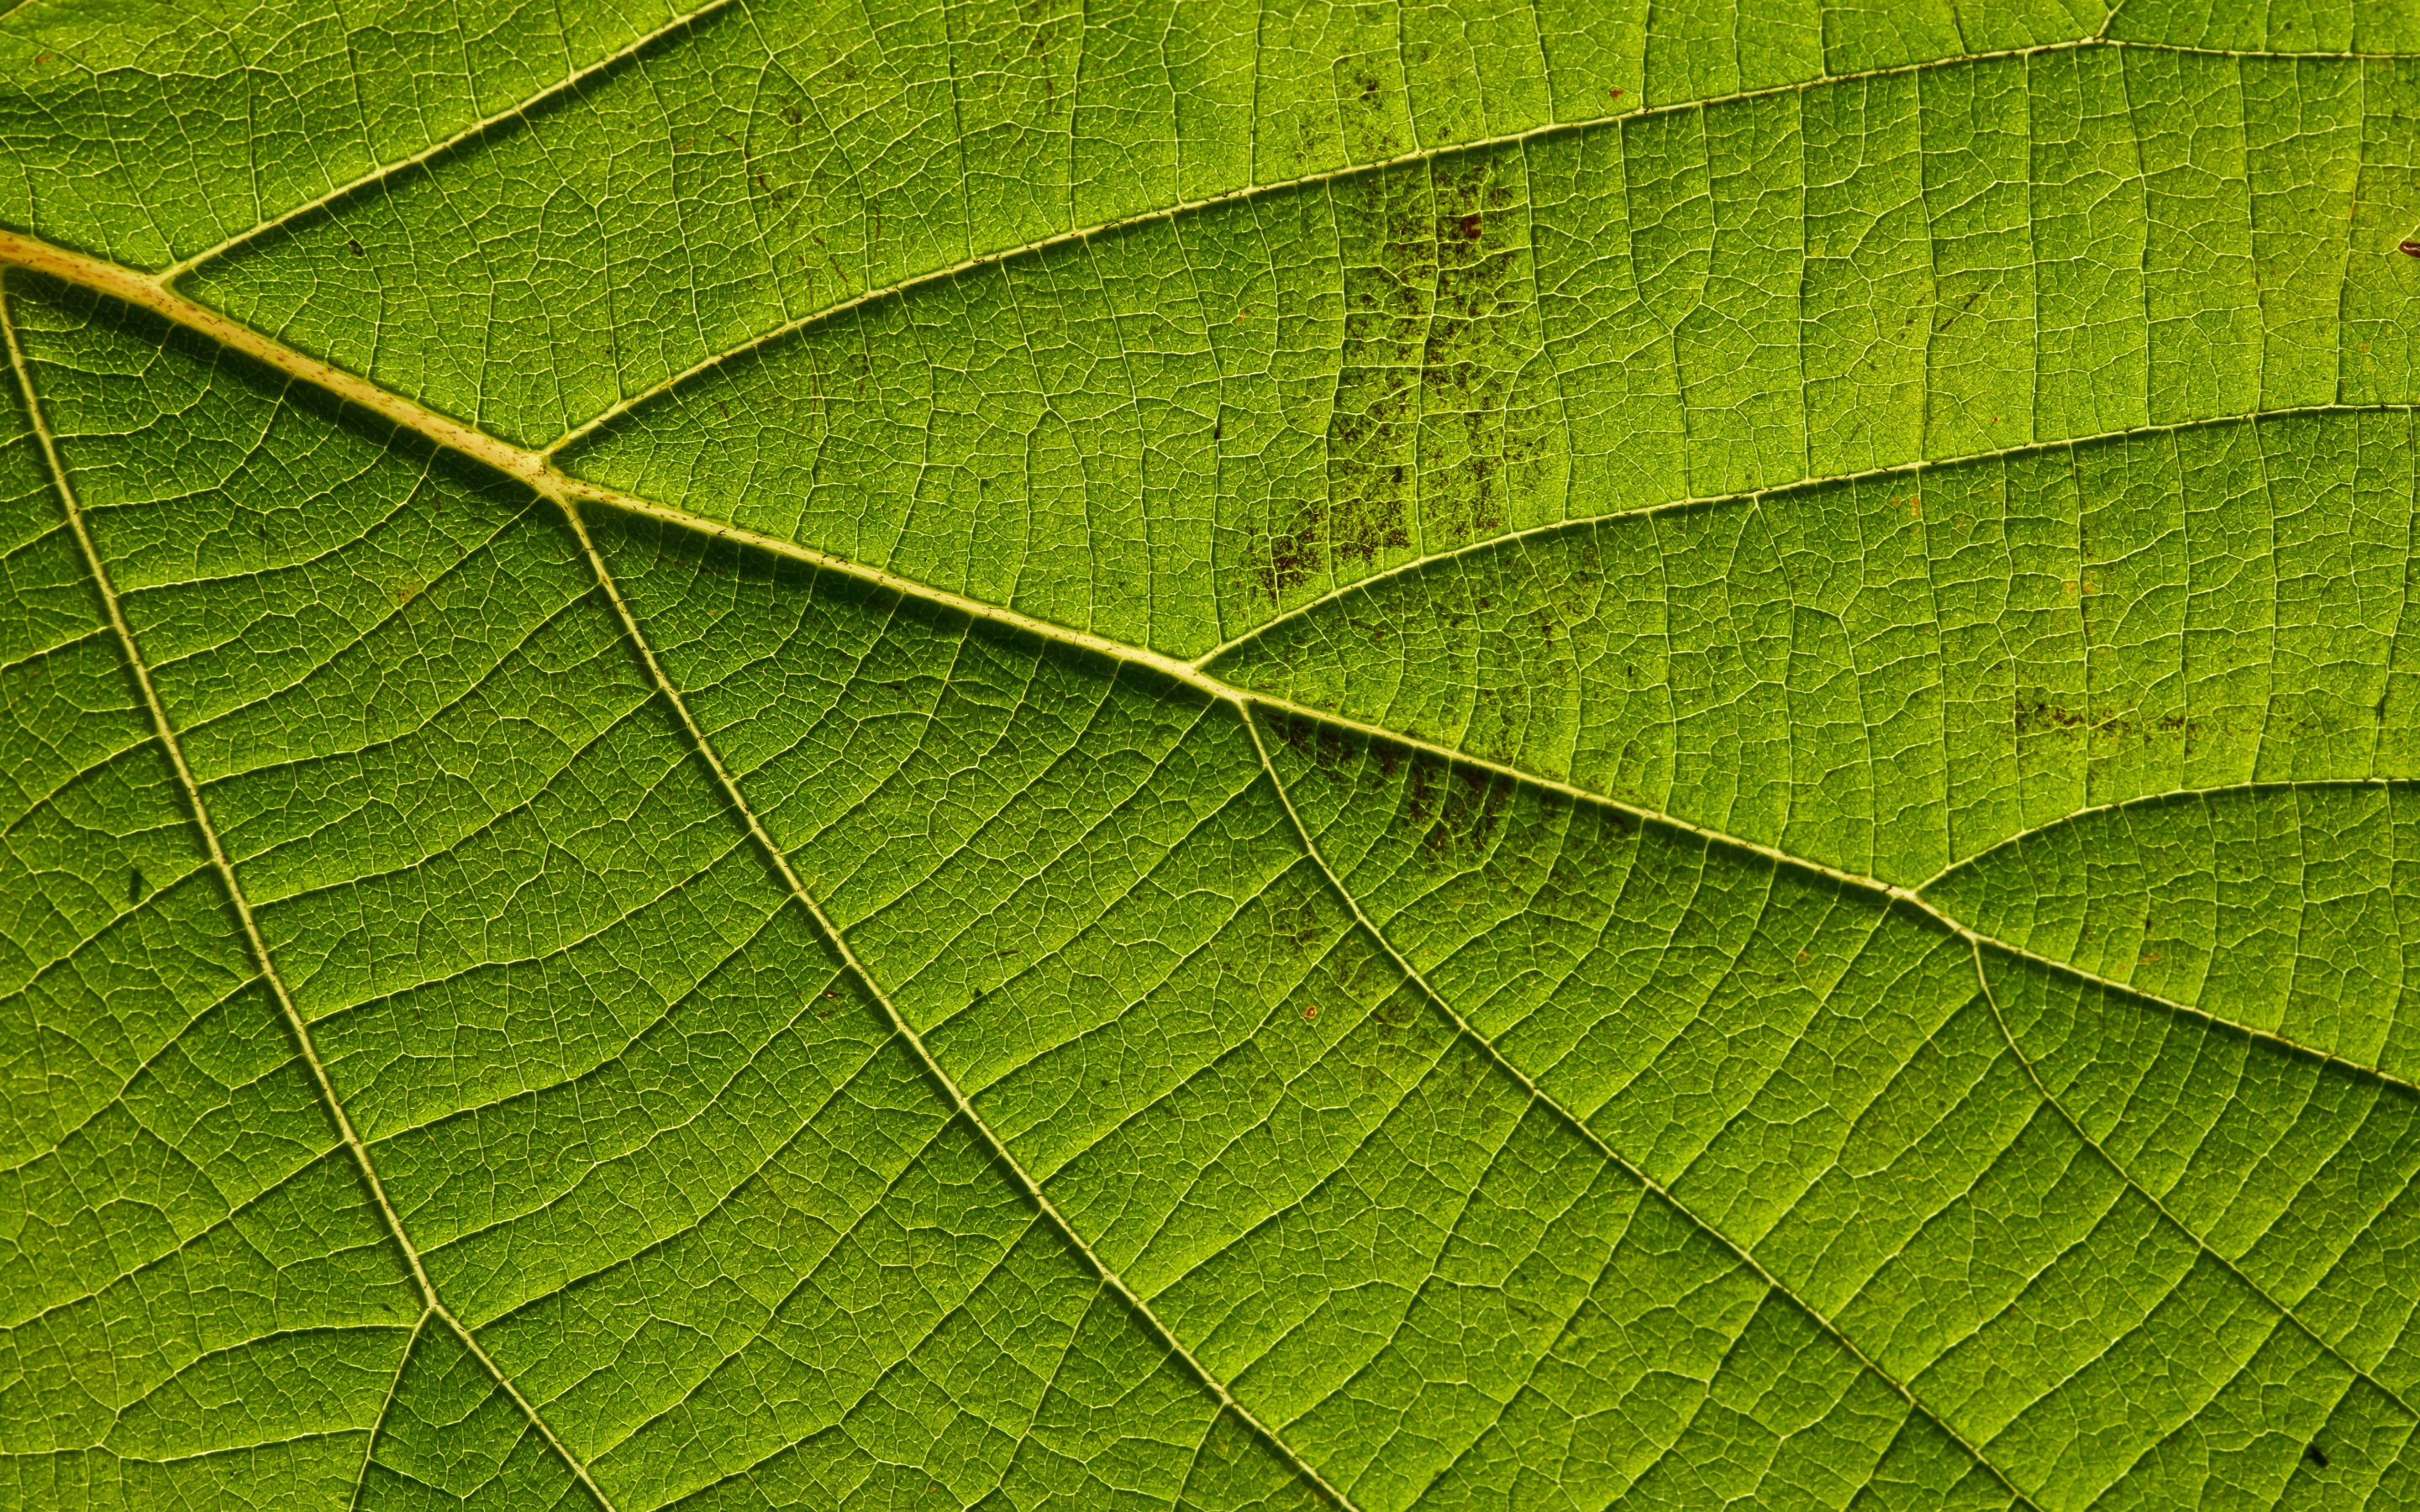 Download wallpapers green leaf texture, green eco background, green leaf  background, creative green background, leaf green texture, environment for  desktop with resolution 2880x1800. High Quality HD pictures wallpapers